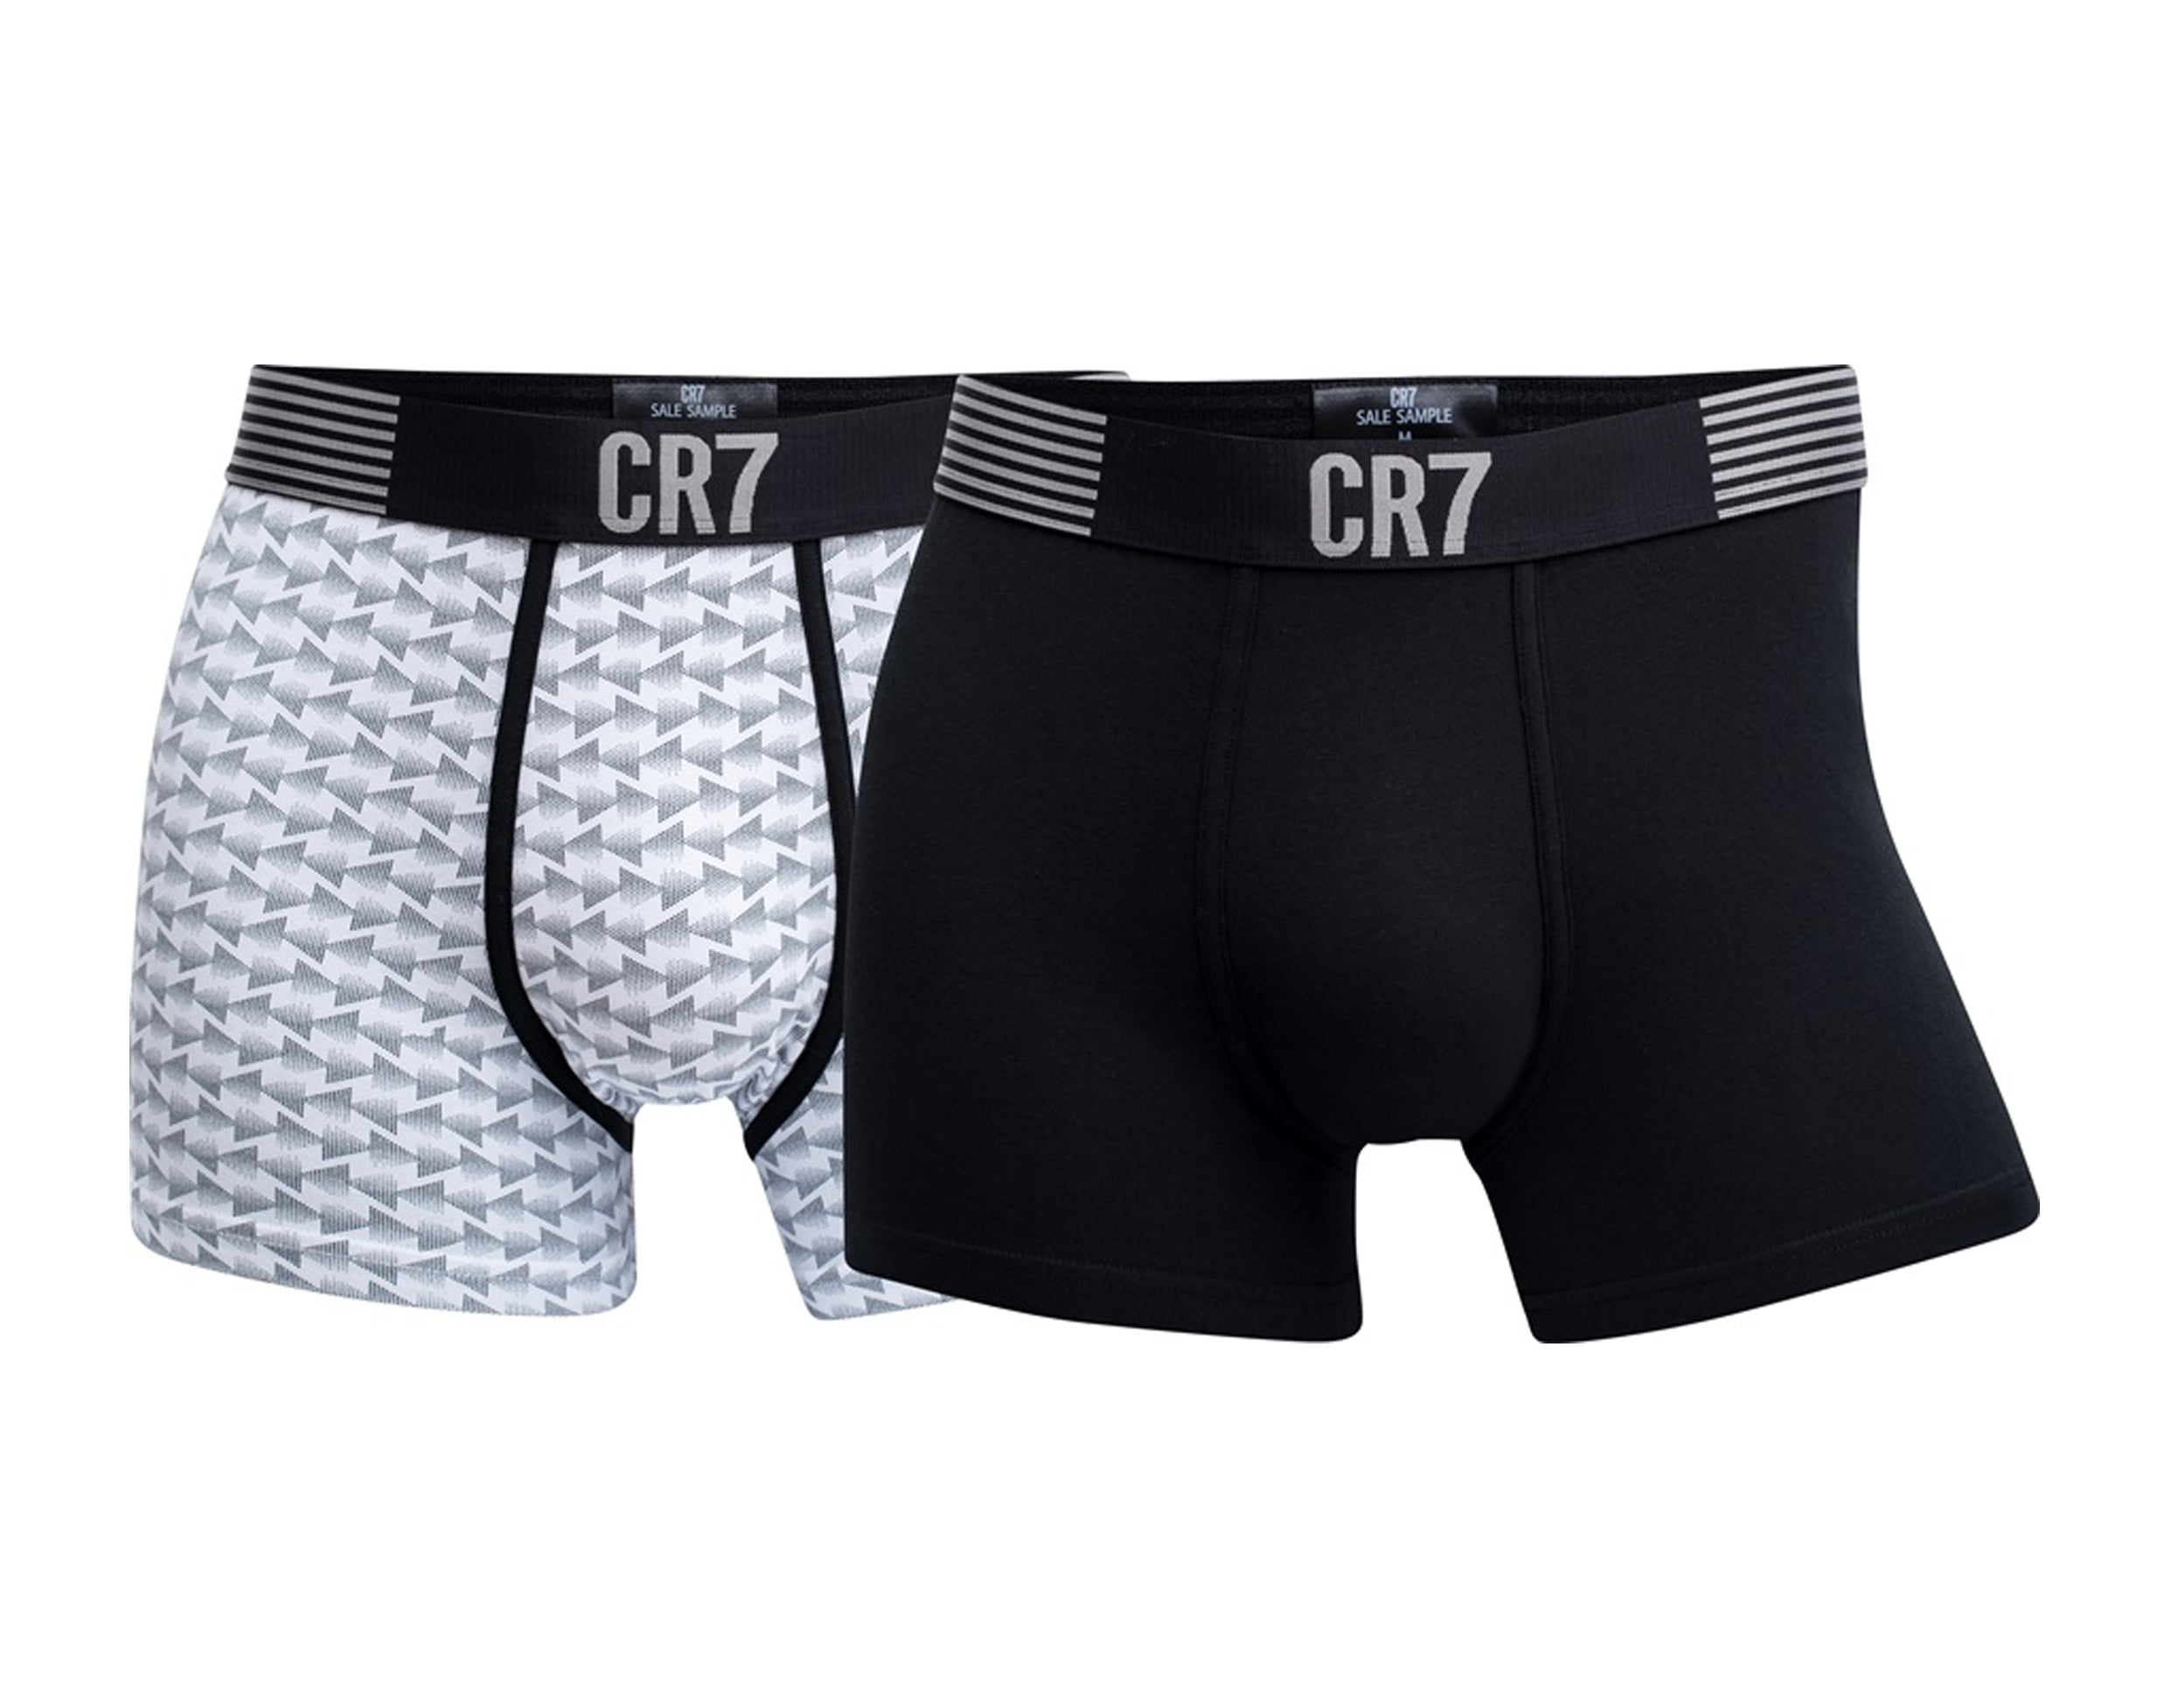 cr7 boxers sale,OFF 56%,www.concordehotels.com.tr